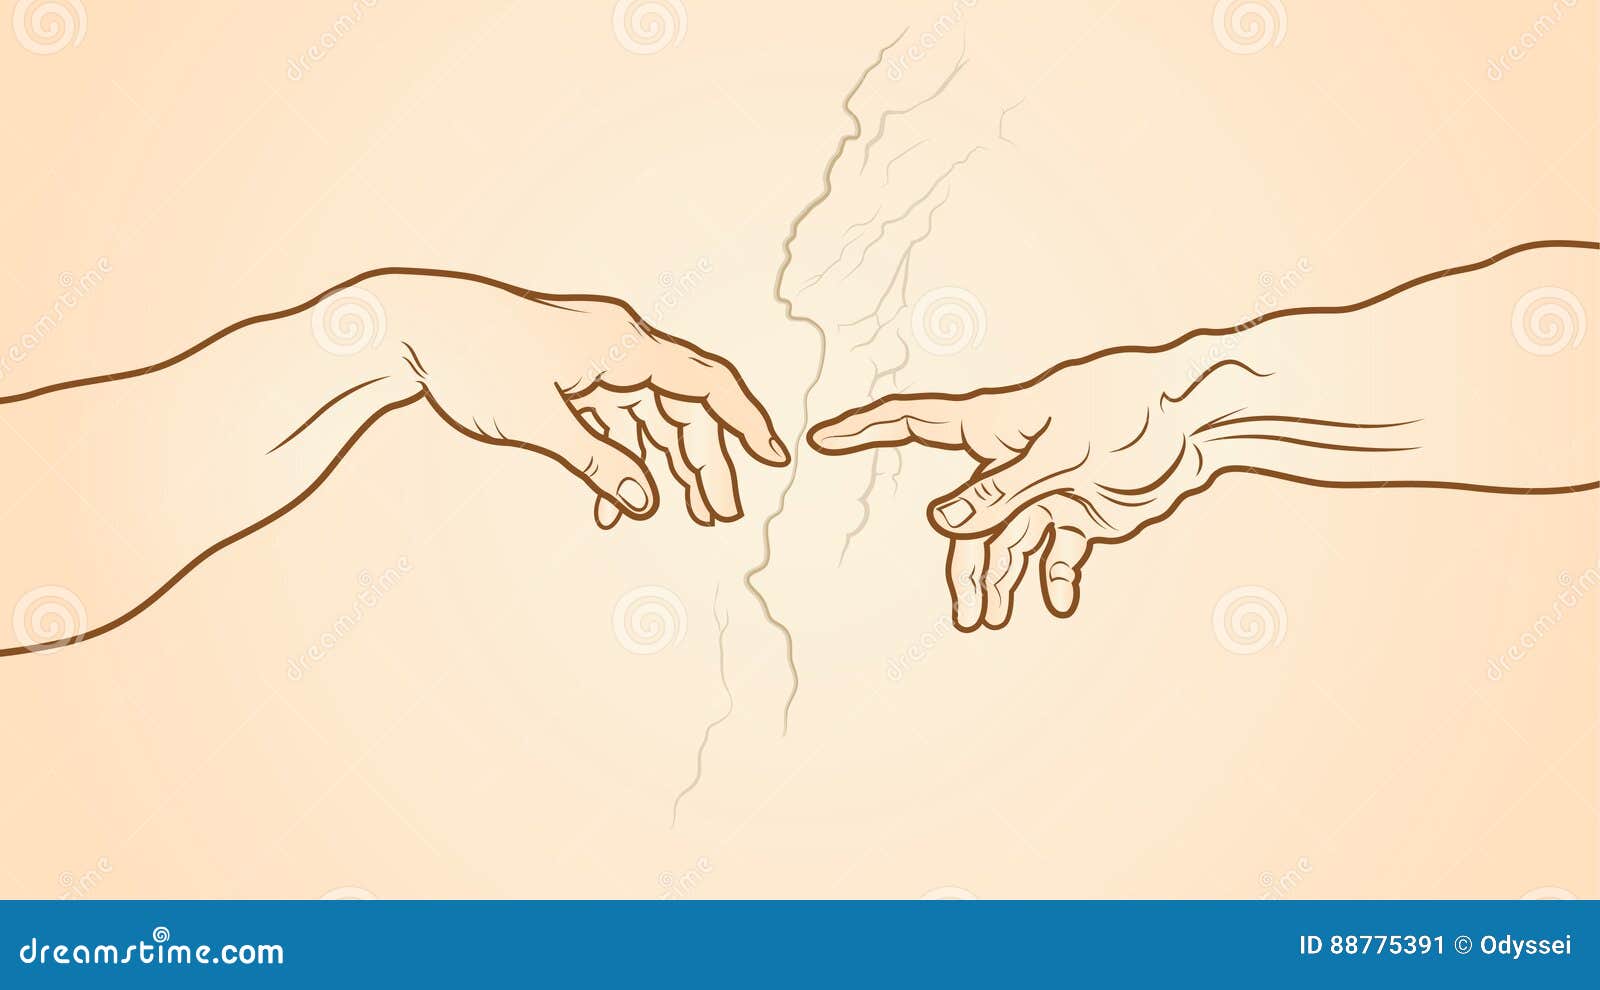 The Creation Of Adam Fragment Stock Vector Illustration Of